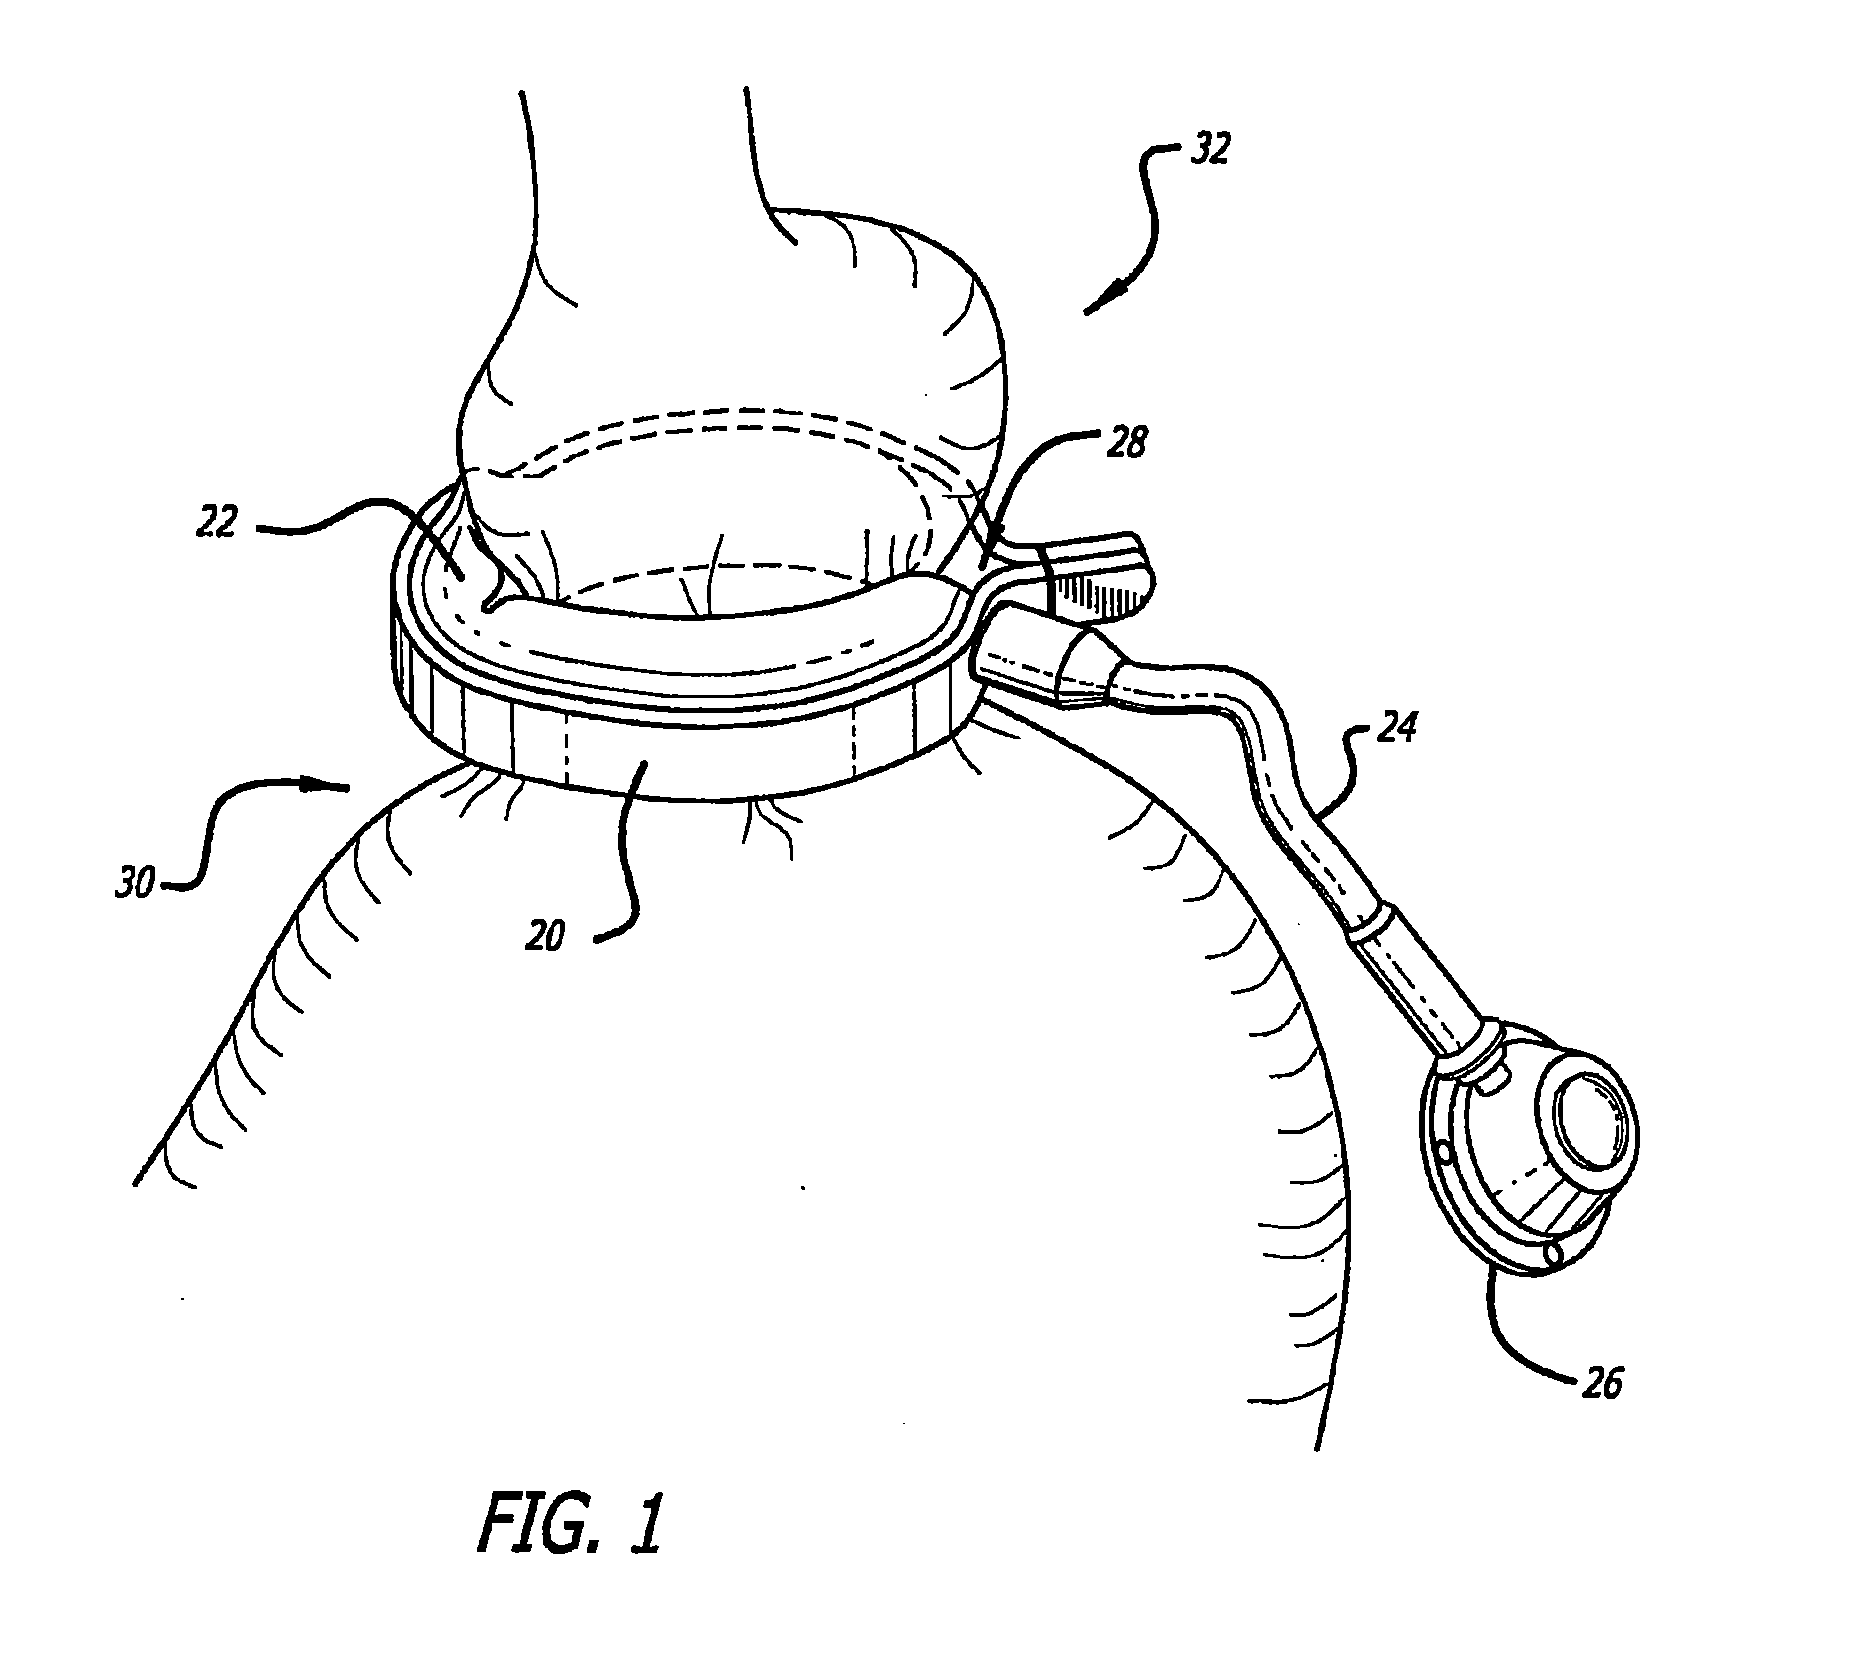 Method for modulating changes in intra-band pressure in a gastric band